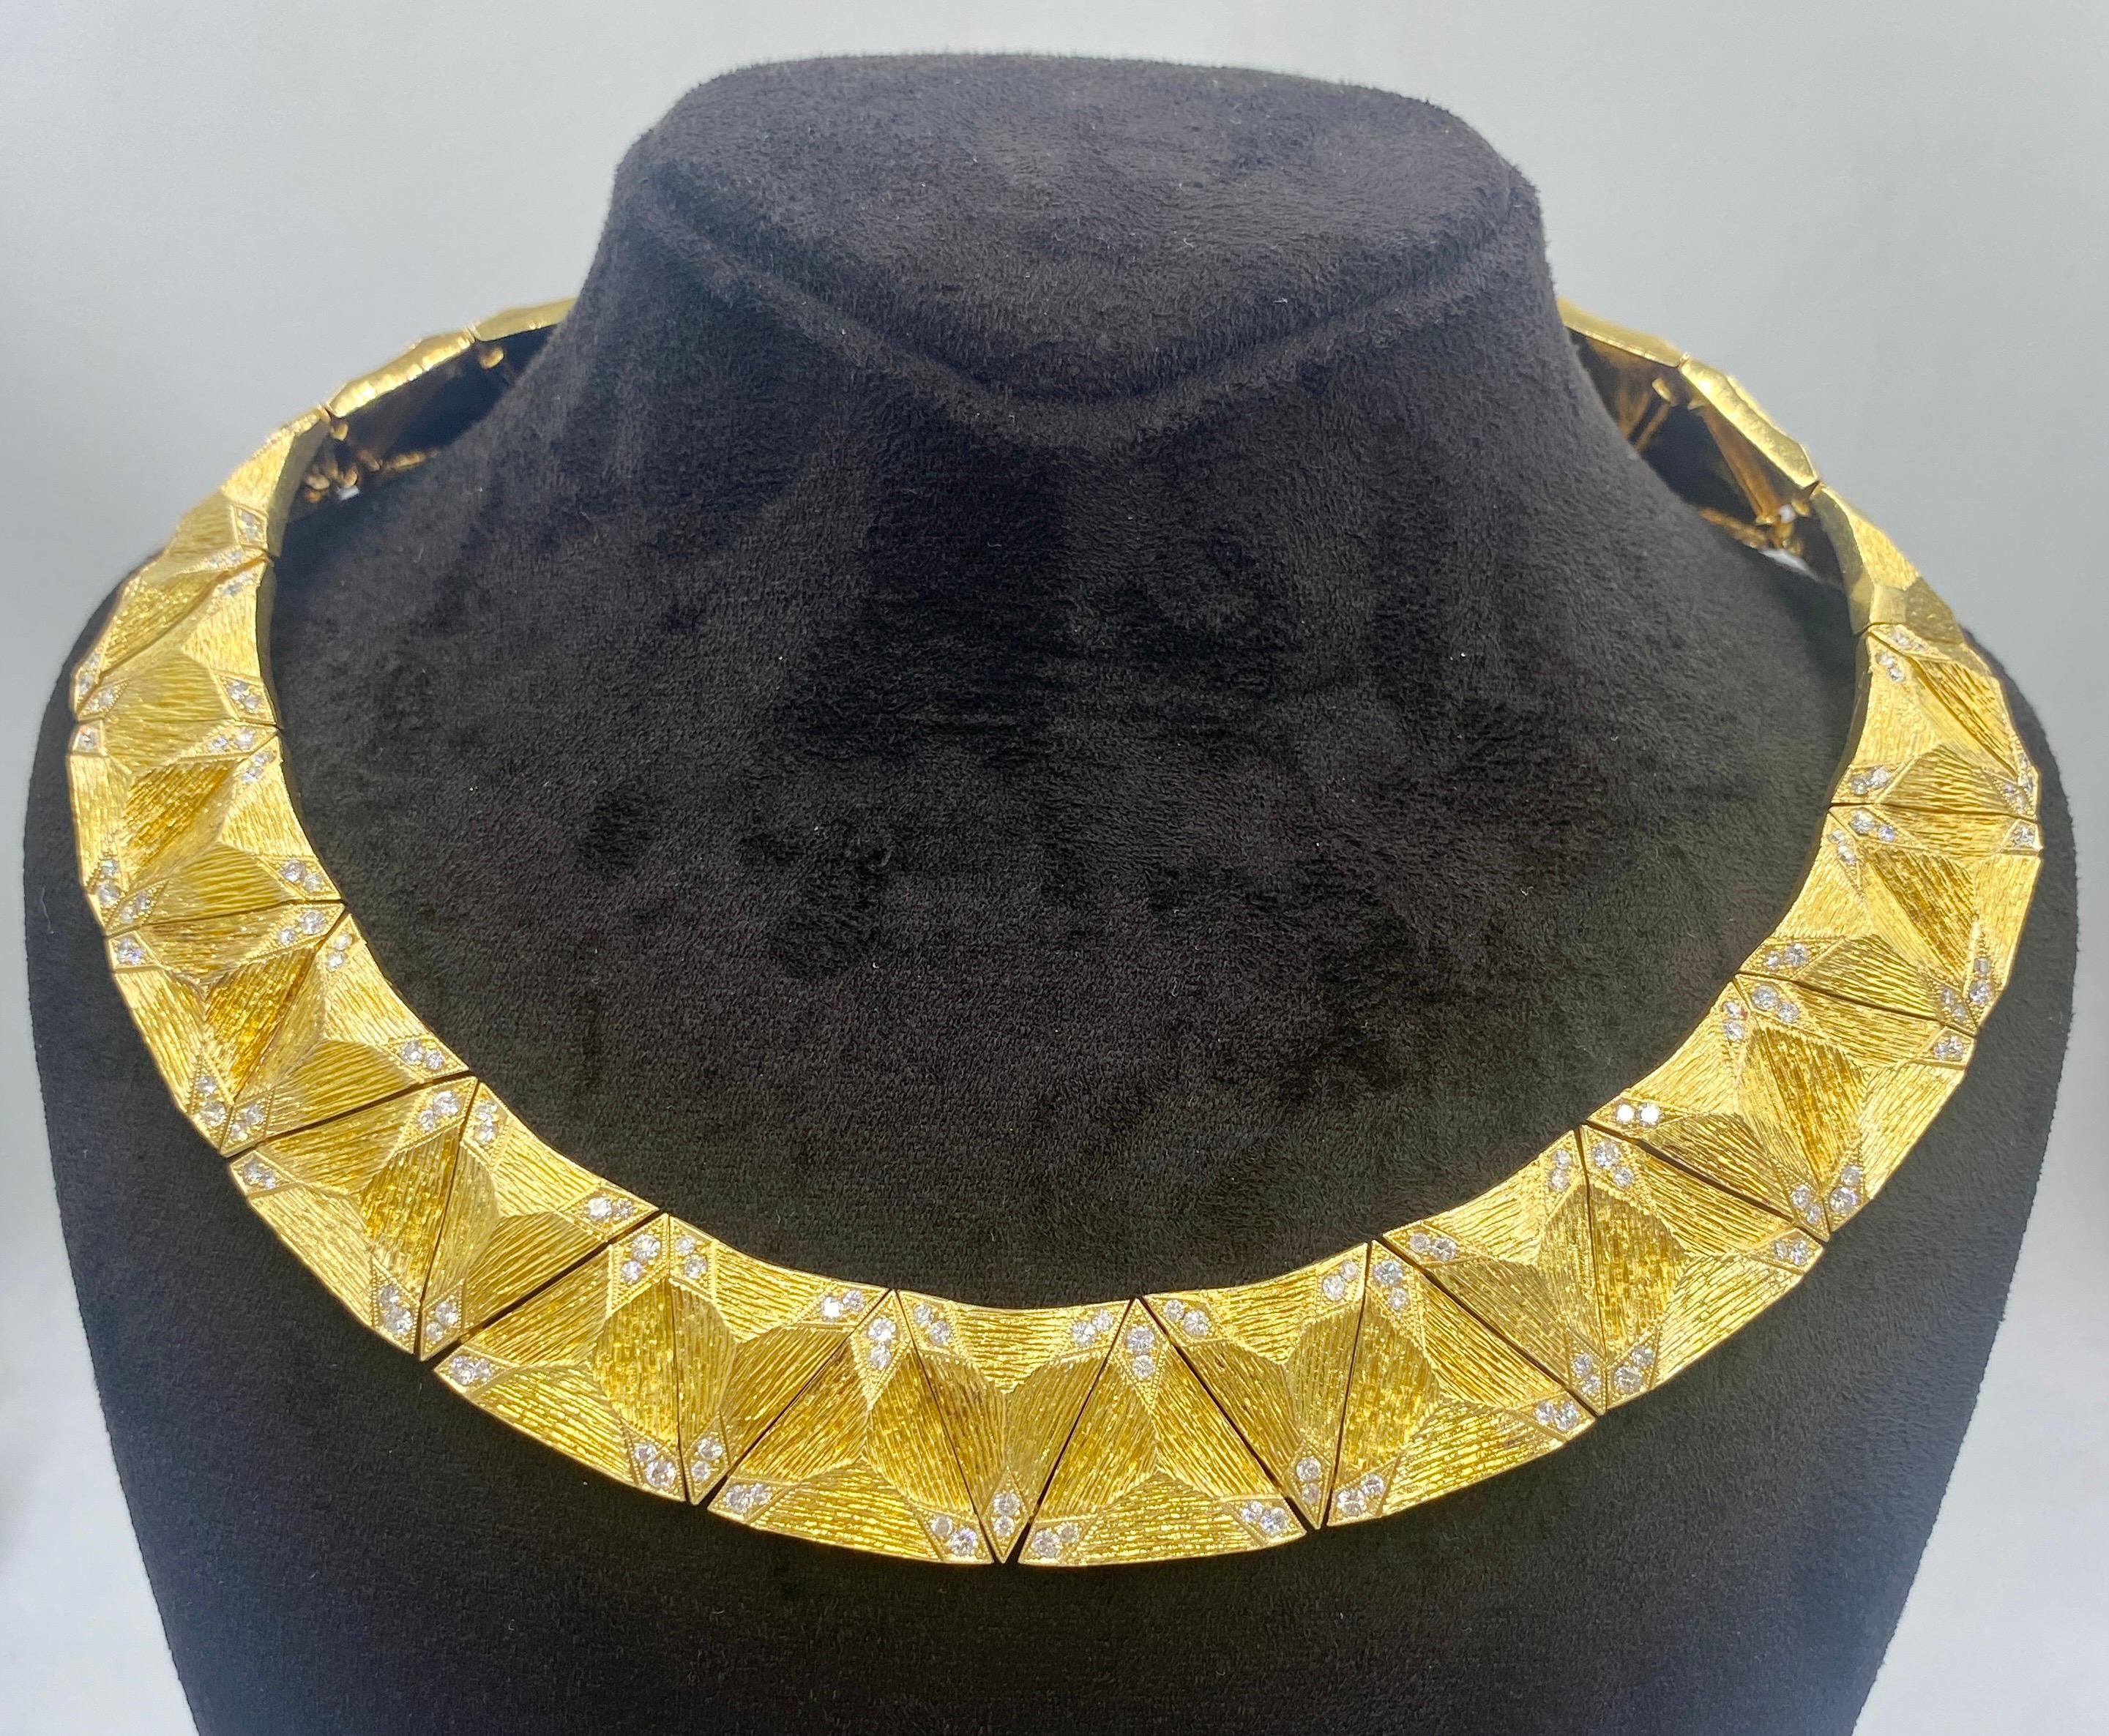 This remarkable 1970s 18k gold necklace is completely hand made and hand engraved. The corners of each triangular piece is adorned with small diamonds which accentuate the overall sparkle of the choker. Although a hefty piece, it lays comfortably